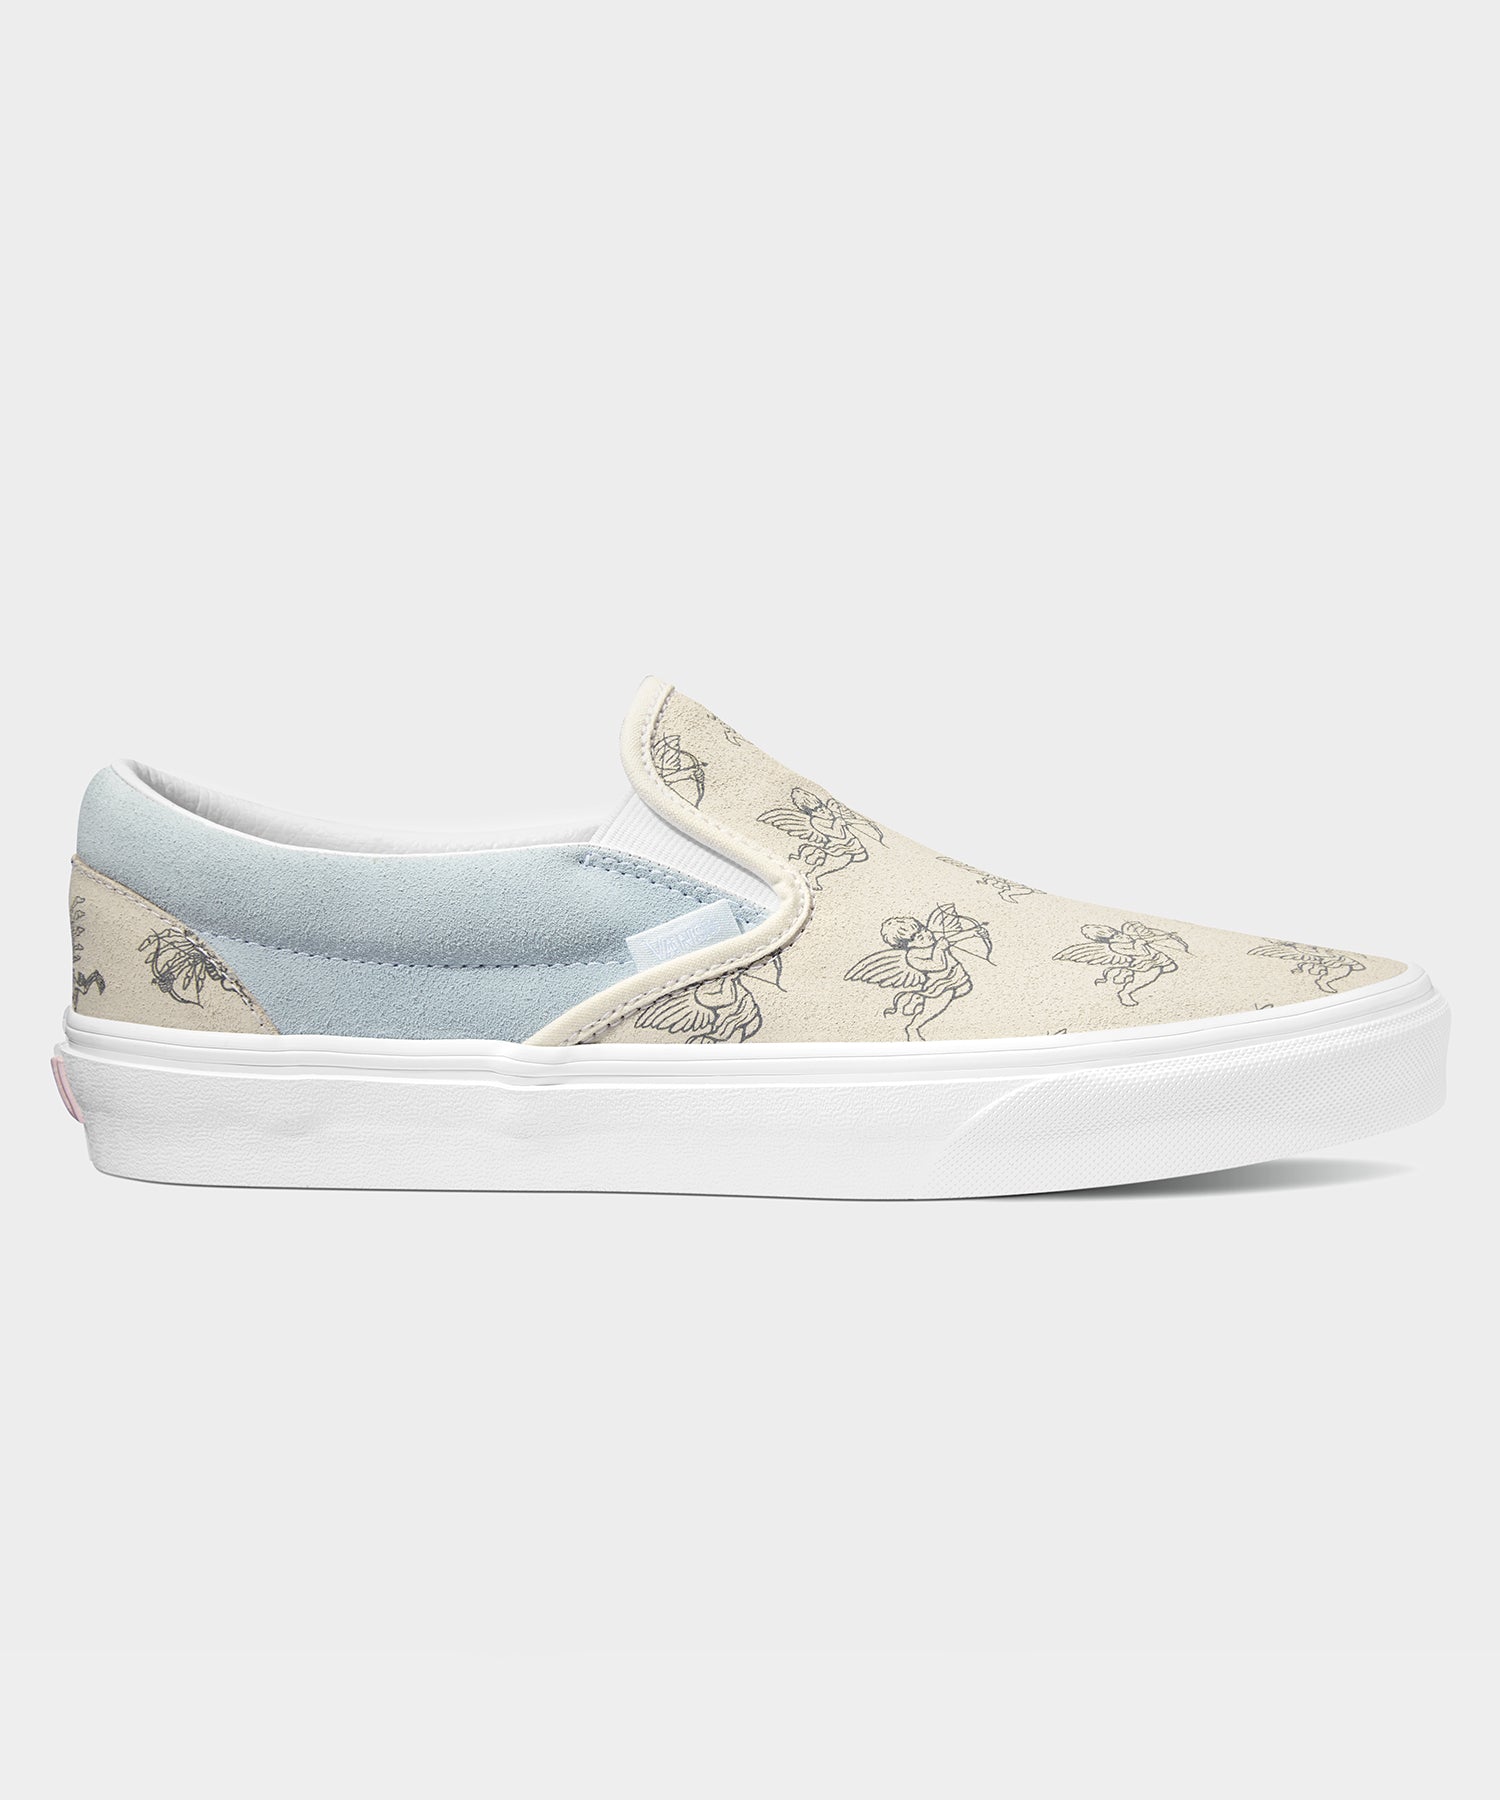 Vans Love You To Death Classic Slip-On 